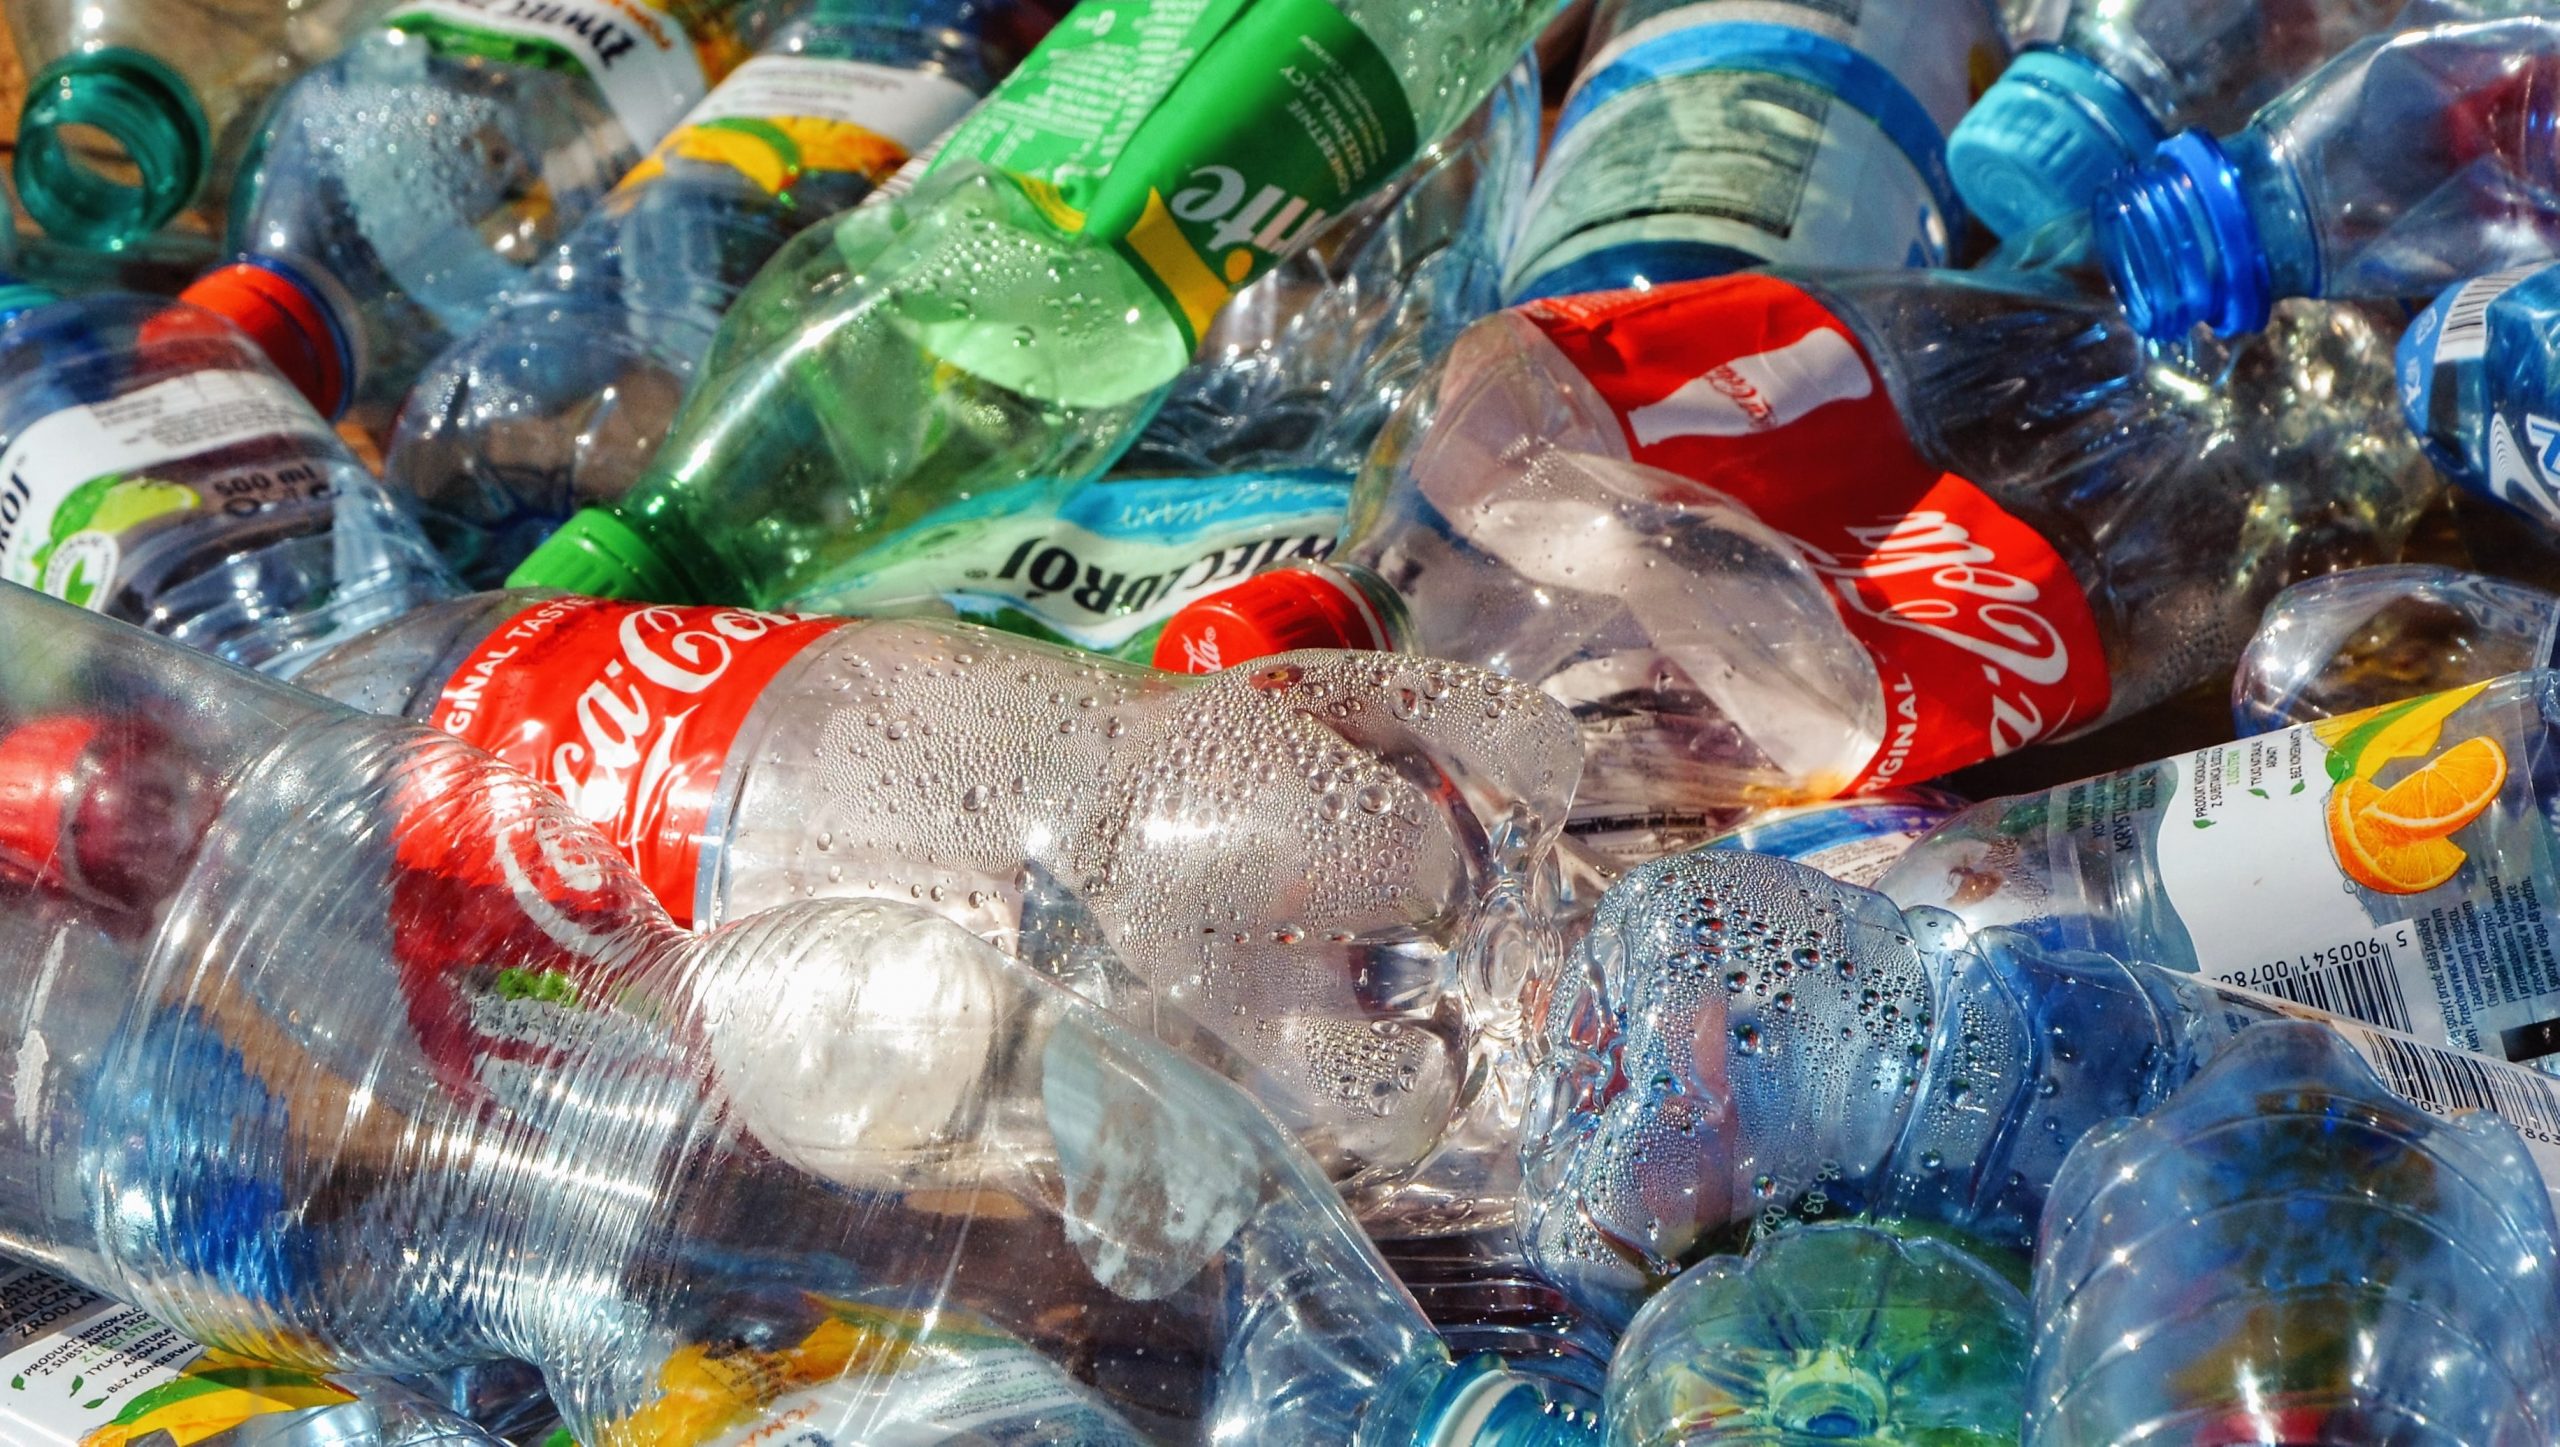 Warsaw, Poland - August 23 2019: a pile of empty, used plastic beverage bottles. Bottles prepared for recycling. Plastic in recyclable waste. Recycle business. Ecologic garbage recycle management